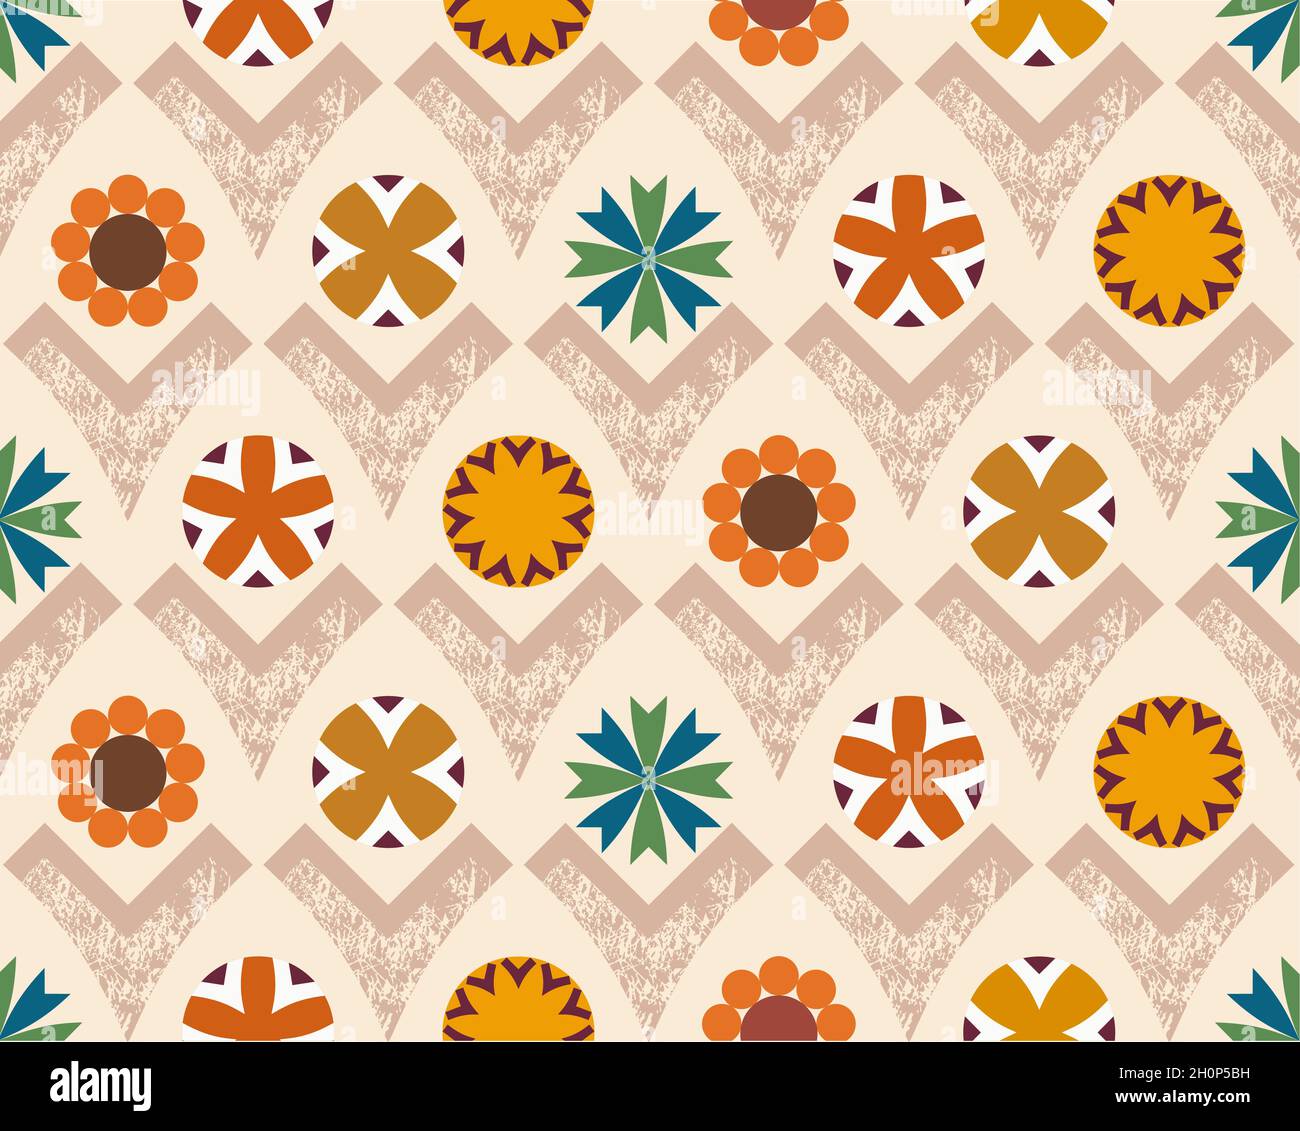 Neutral earthy grounded warm hues geometric flowers in various circular and v shapes. Vector pattern for backgrounds, digital realm, printed items. Stock Vector